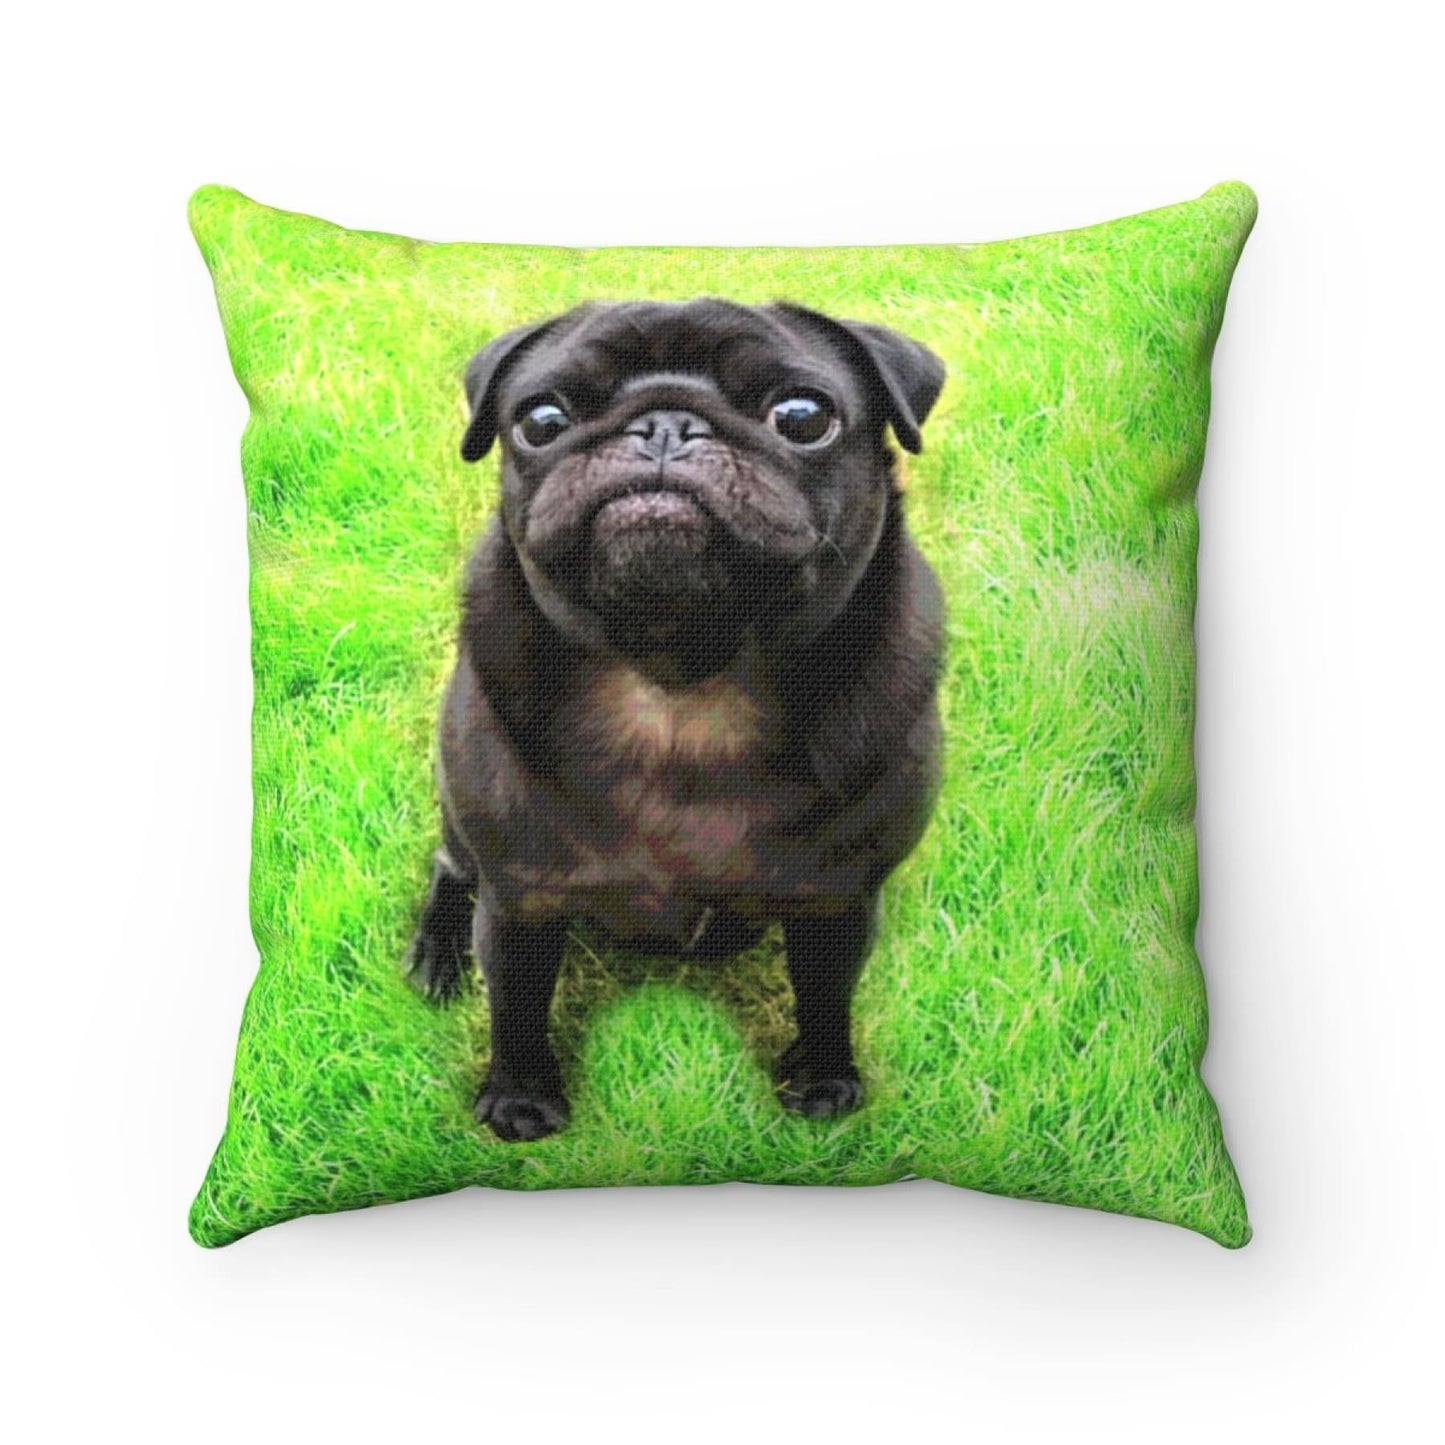 Your own Photo Polyester Square Pillow Case